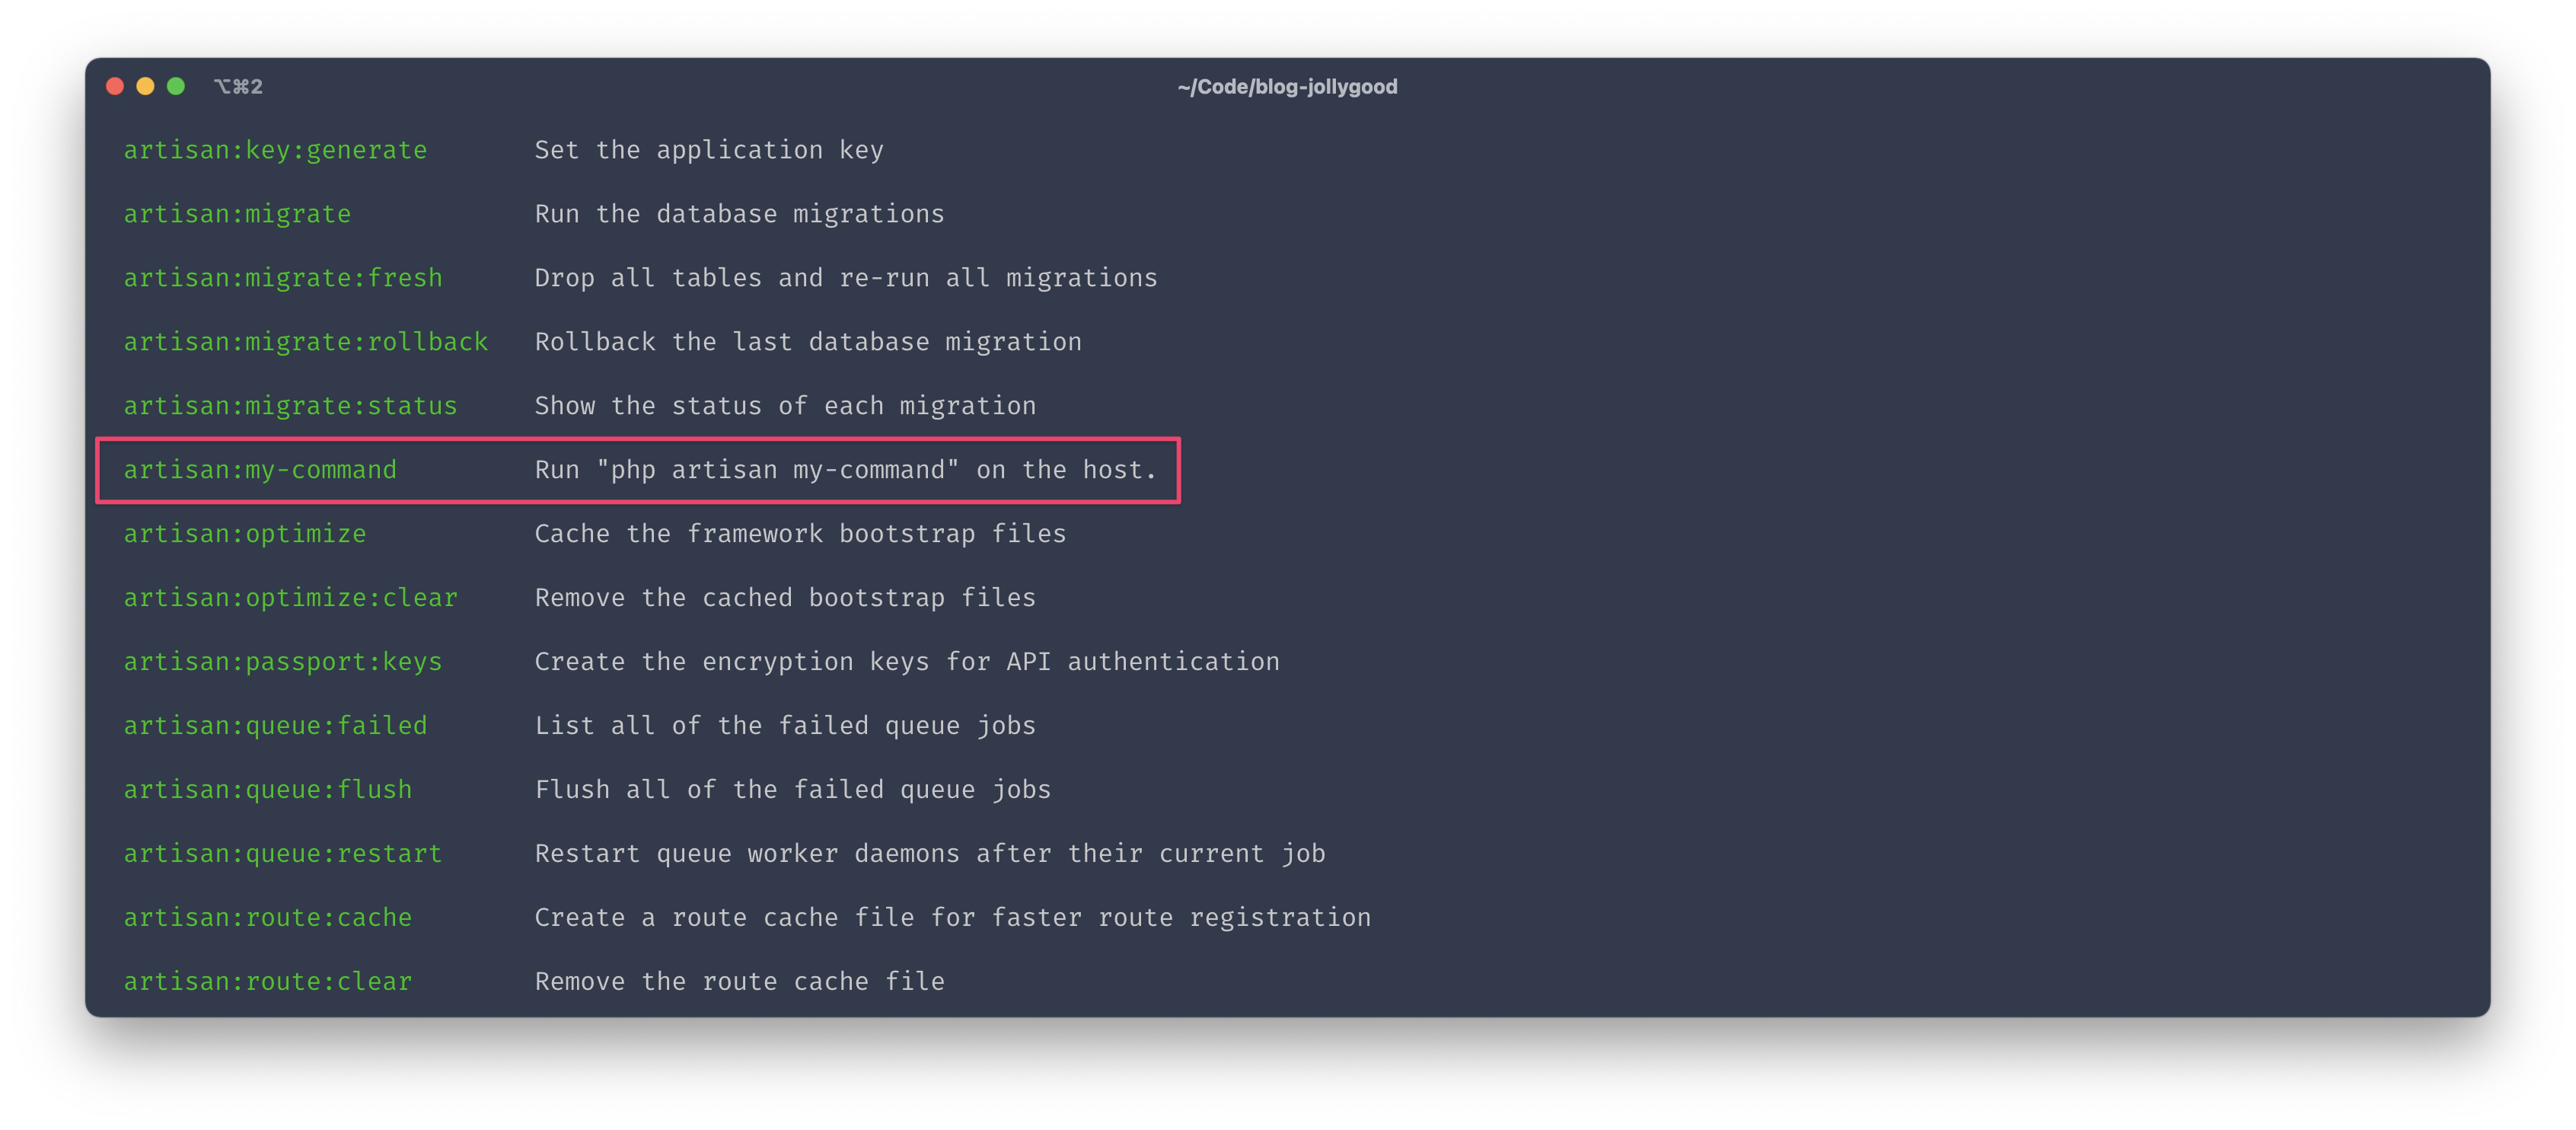 Screenshot of the terminal output of "dep" showing the list of all available tasks including "artisan:my-command".